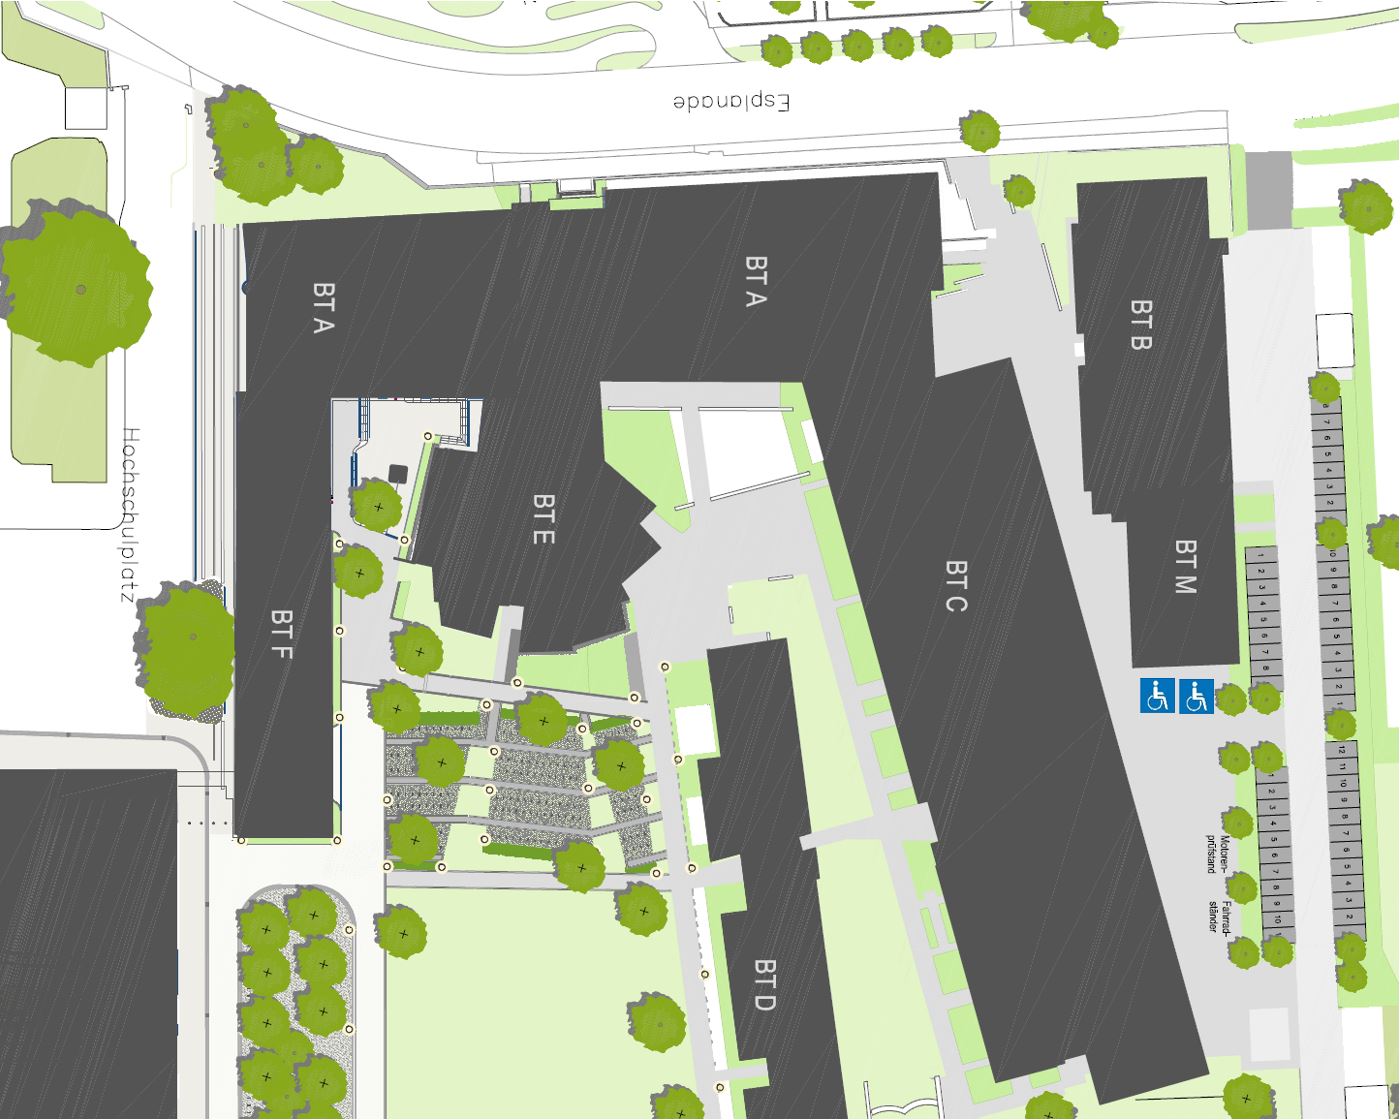 The site plan shows the disabled parking spaces at THI